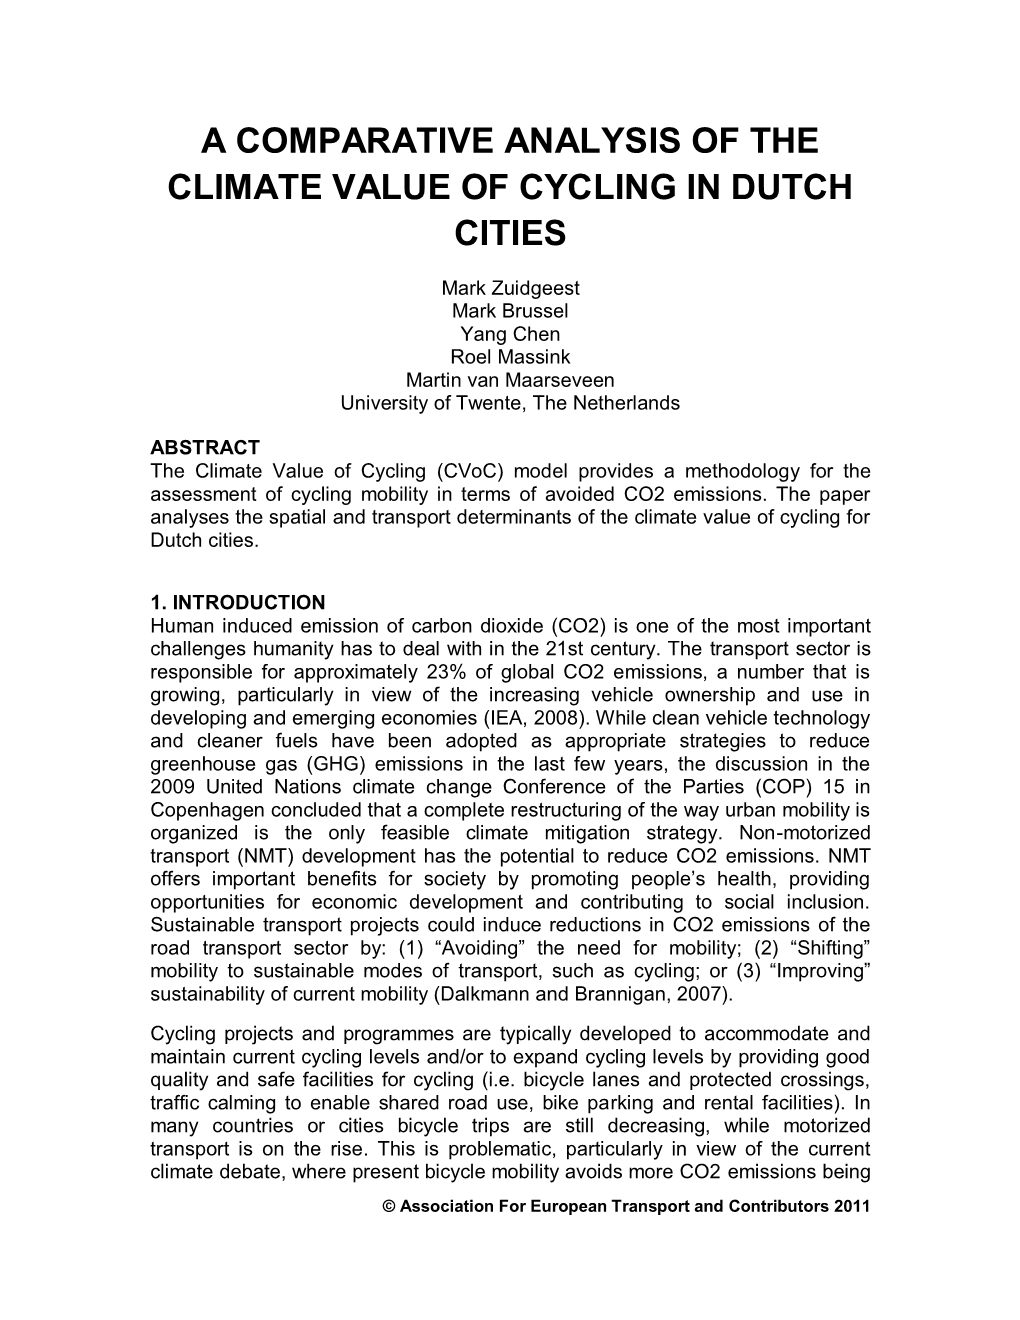 A Comparative Analysis of the Climate Value of Cycling in Dutch Cities